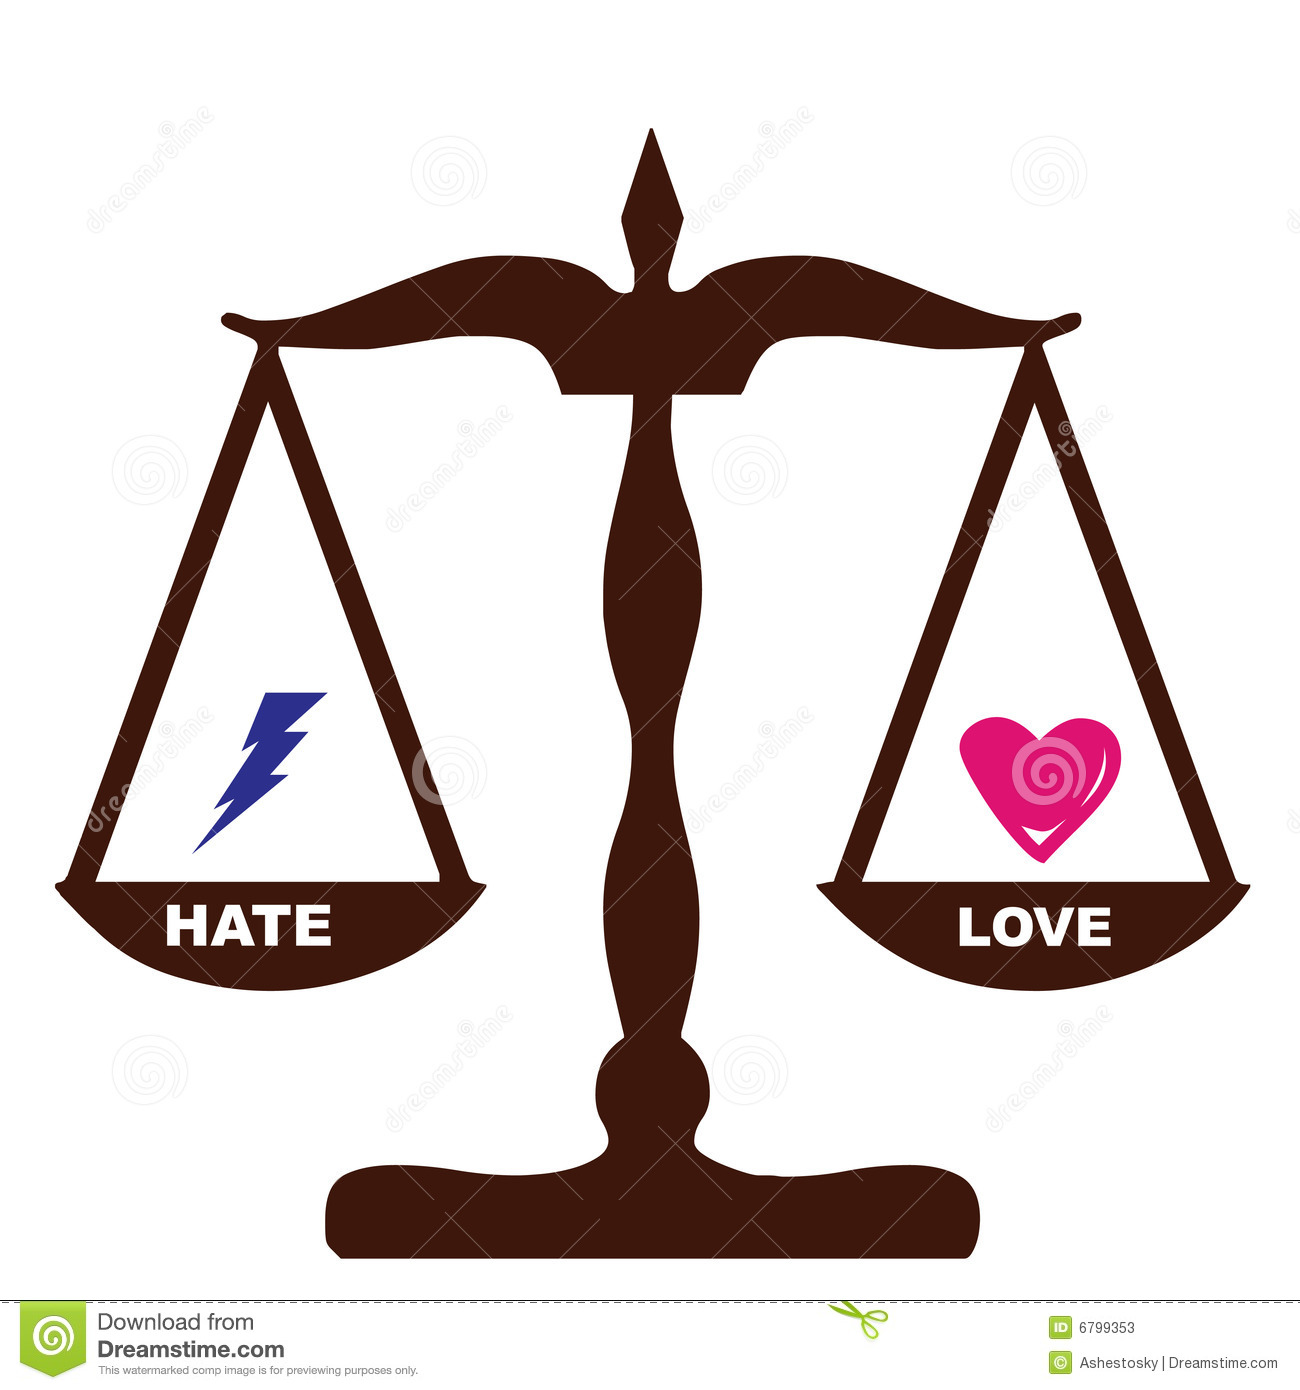 More Similar Stock Images Of   Love Hate Feelings Weights The Same